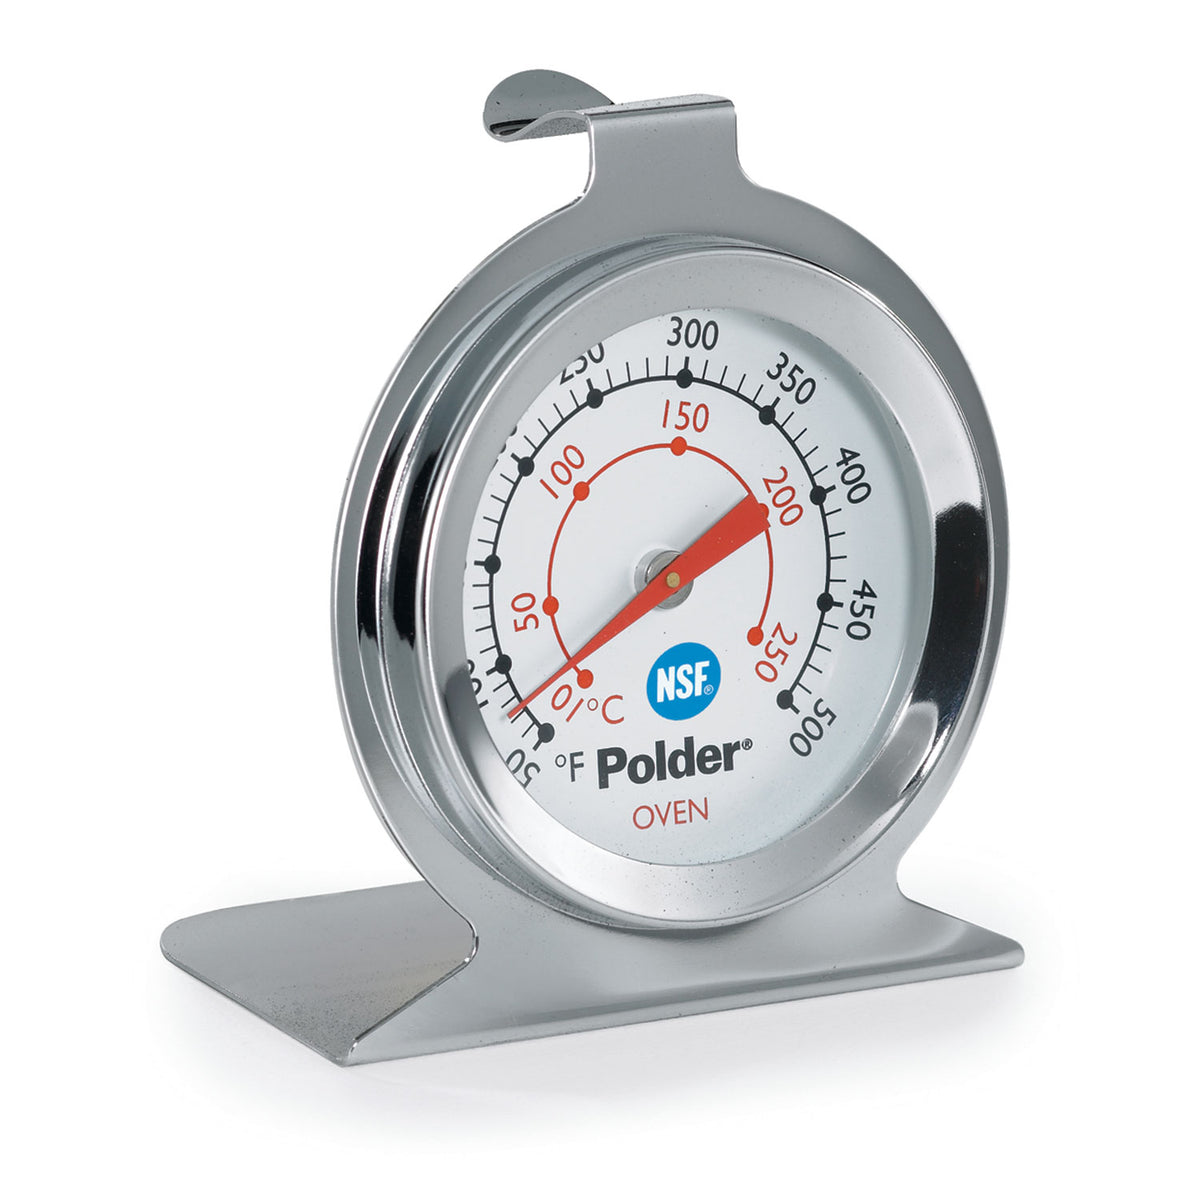 NSF Oven Thermometer | Polder Products - life.style.solutions